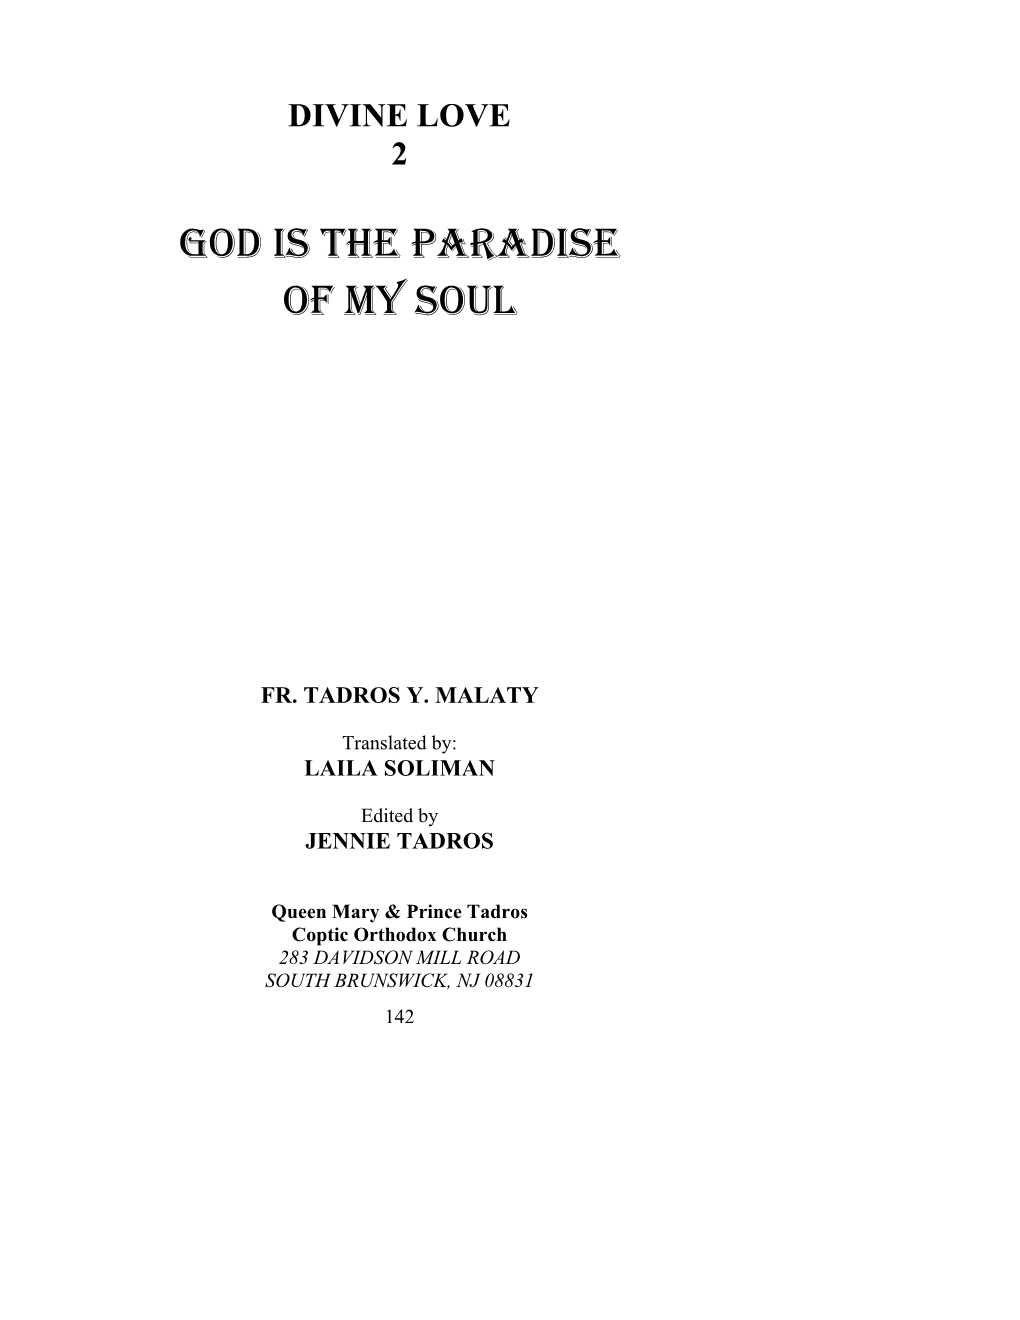 God Is the Paradise of My Soul